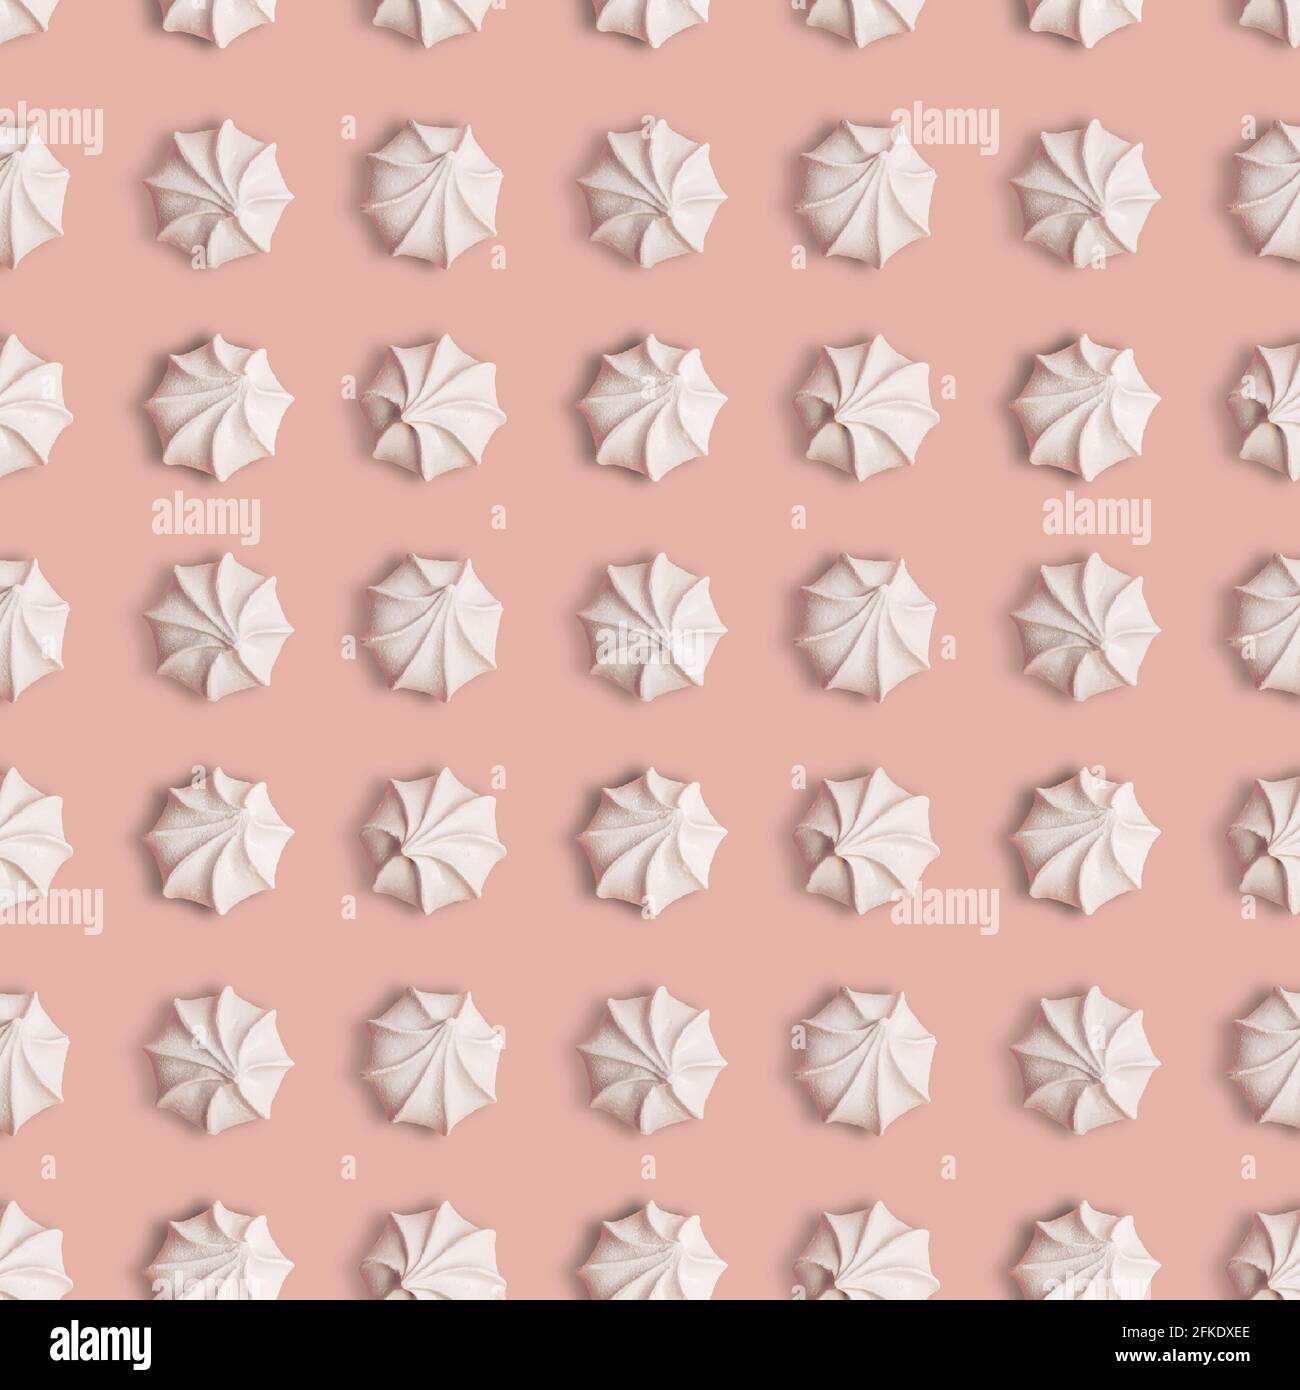 Creative seamless pattern with meringue cookies on a ligth pink background Stock Photo